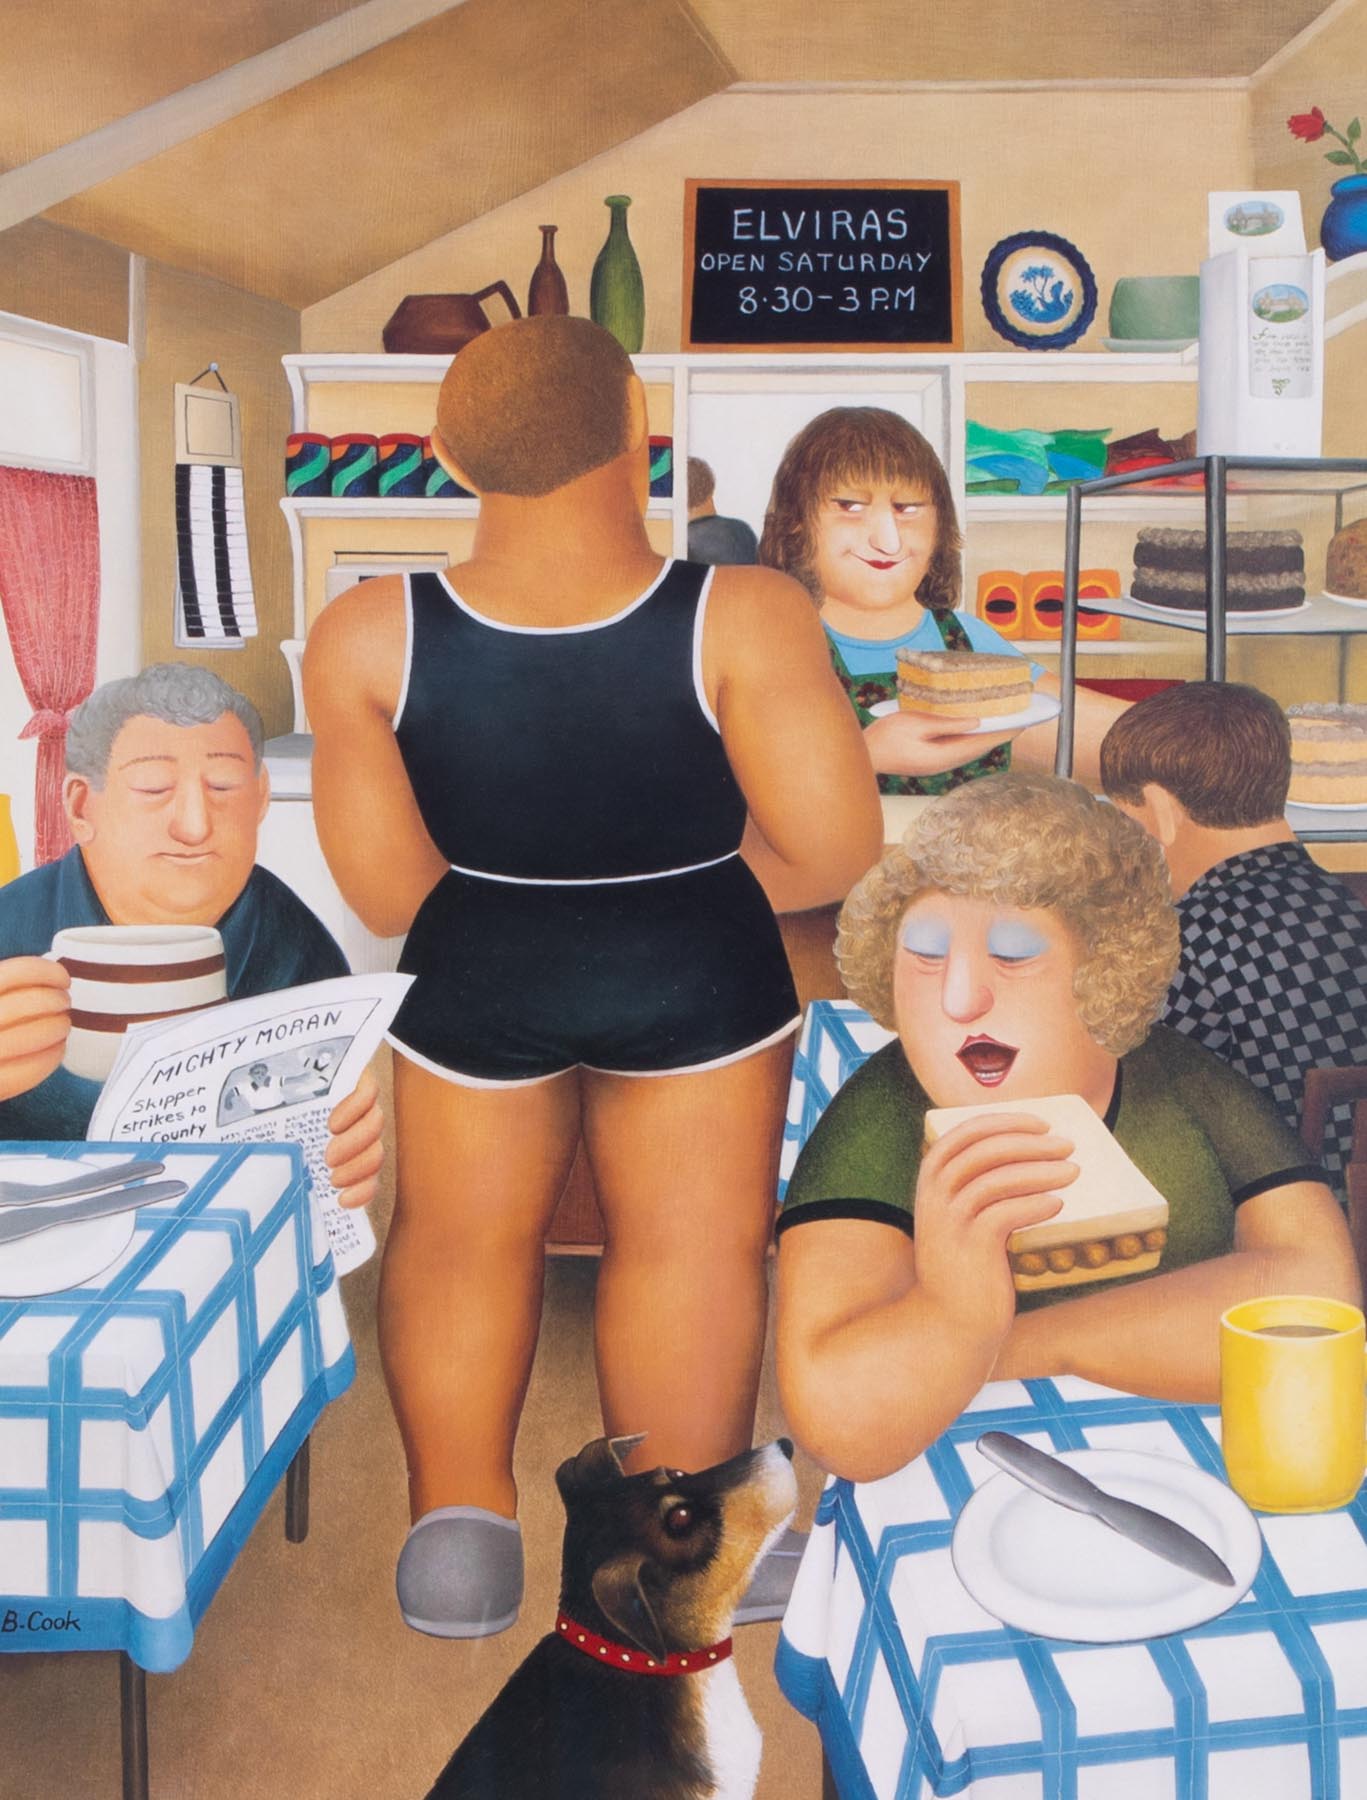 Beryl Cook (1926-2008) 'Elvira's Cafe' signed limited edition print 838/850, overall size 67cm x - Image 2 of 2